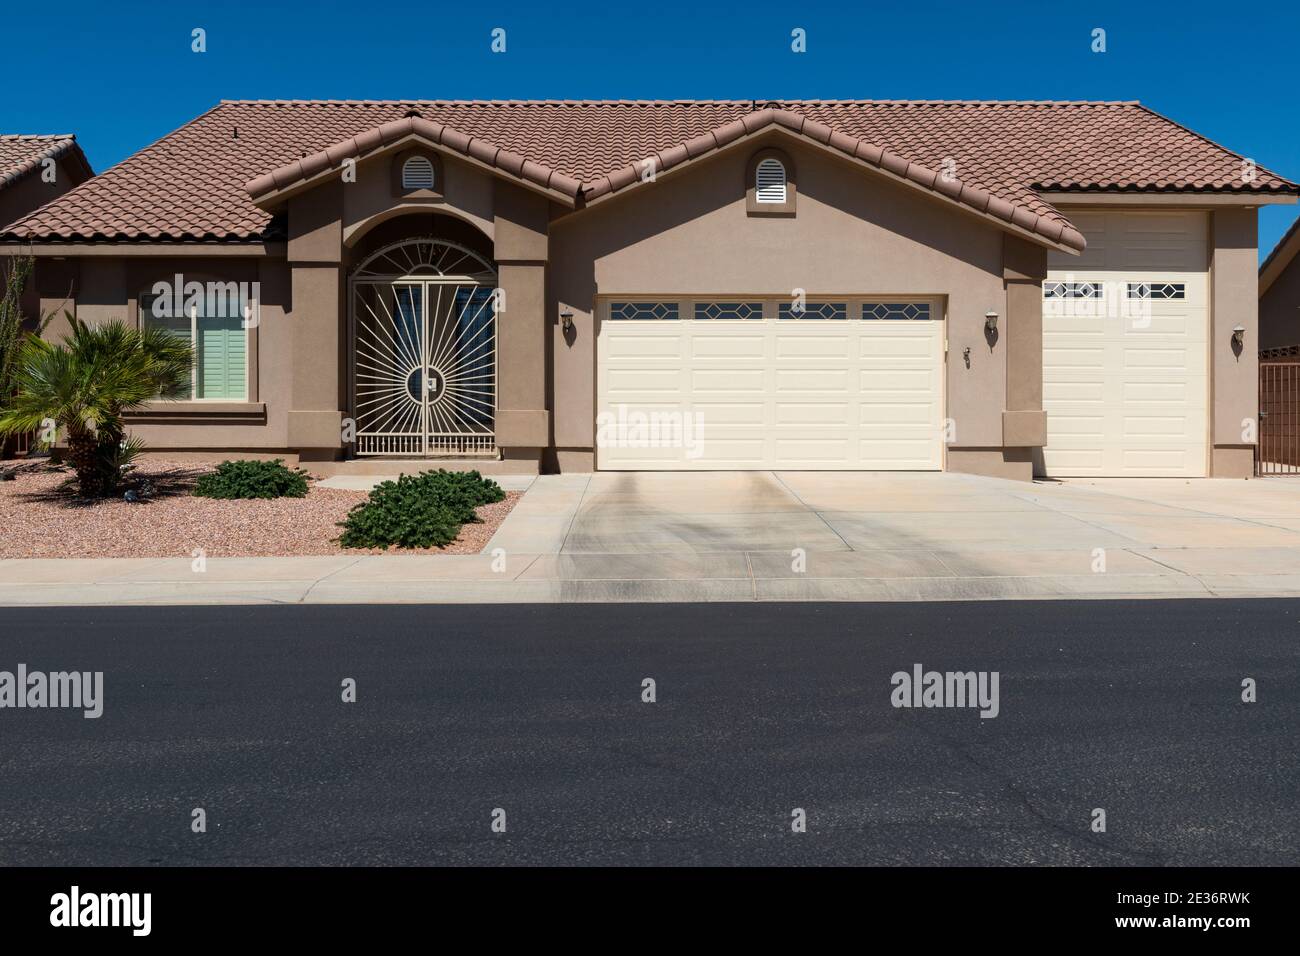 The facade of a residential house in a suburb area in the State of Nevada, USA. Stock Photo